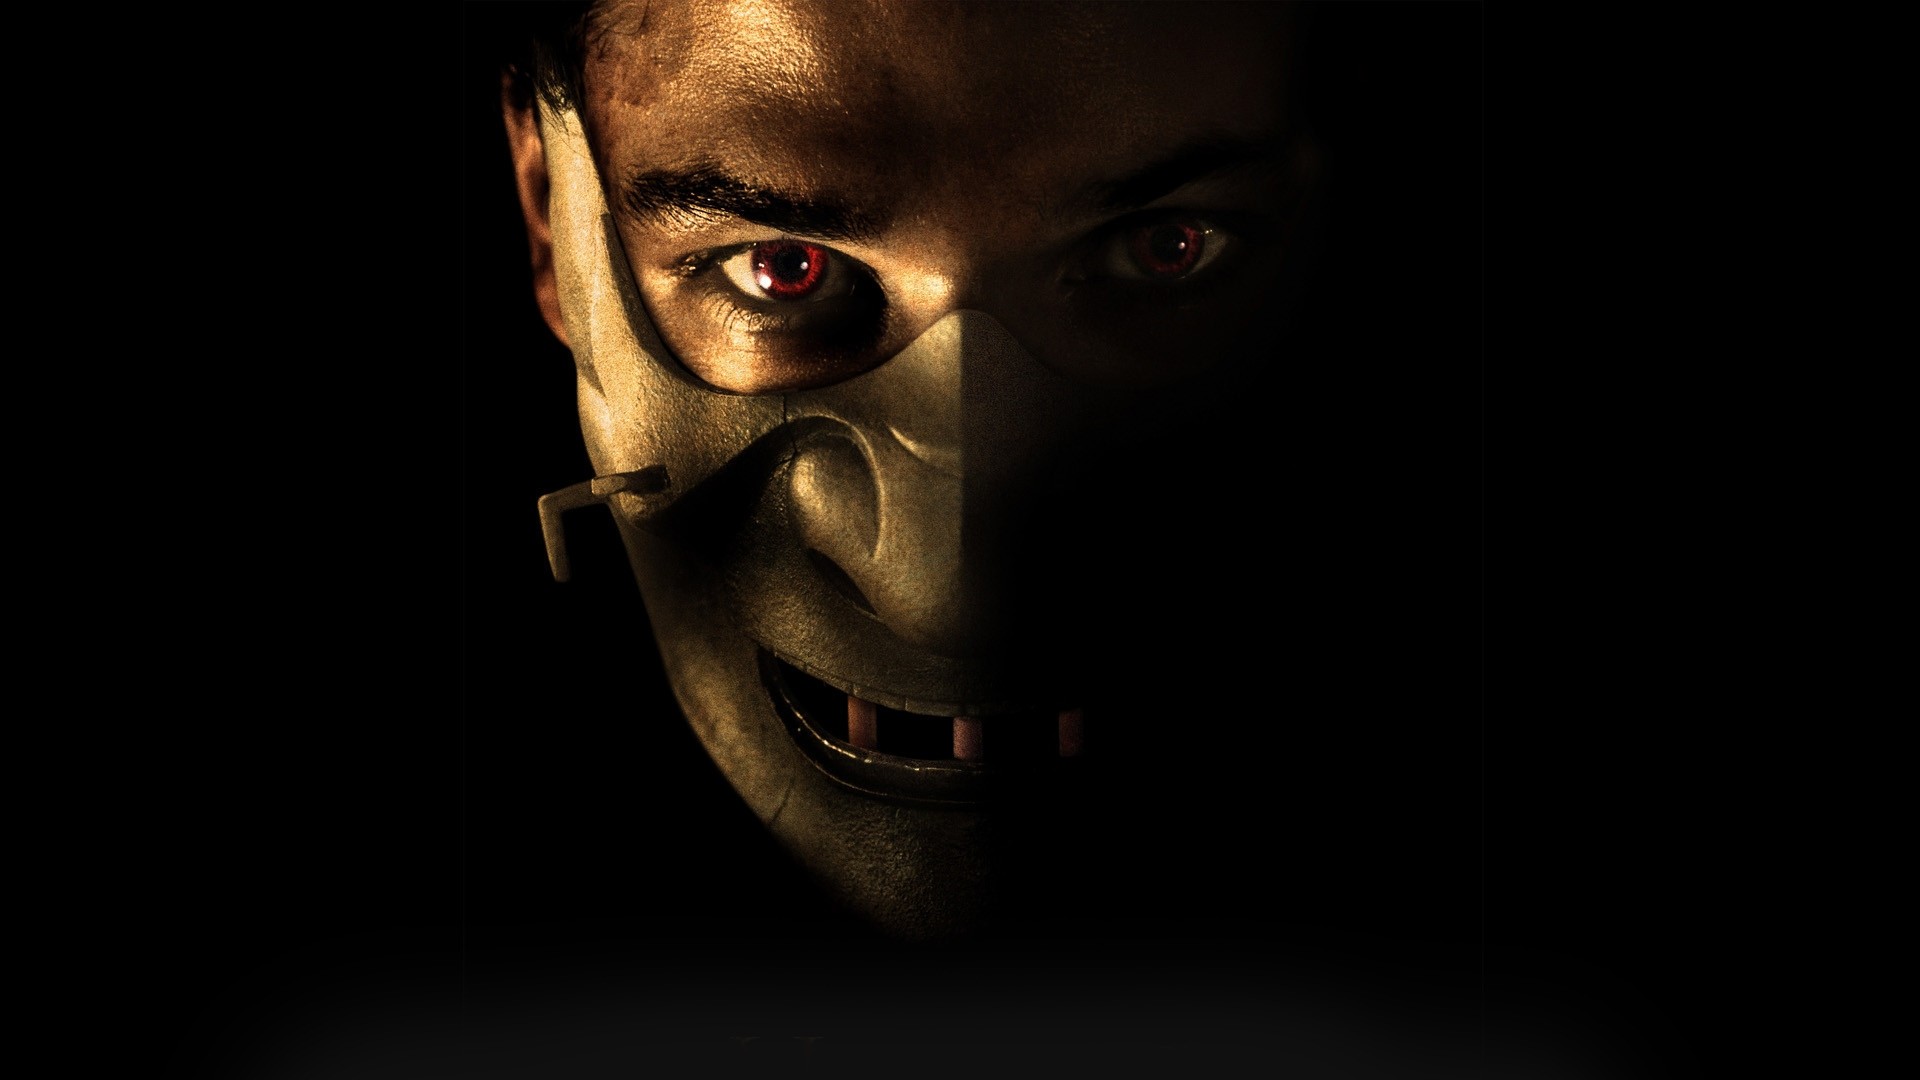 1920x1080 ... hannibal rising news, pictures and videos and learn all about hannibal  lecter, mask, hannibal rising from wallpapers4u.org, your wallpaper news  source.